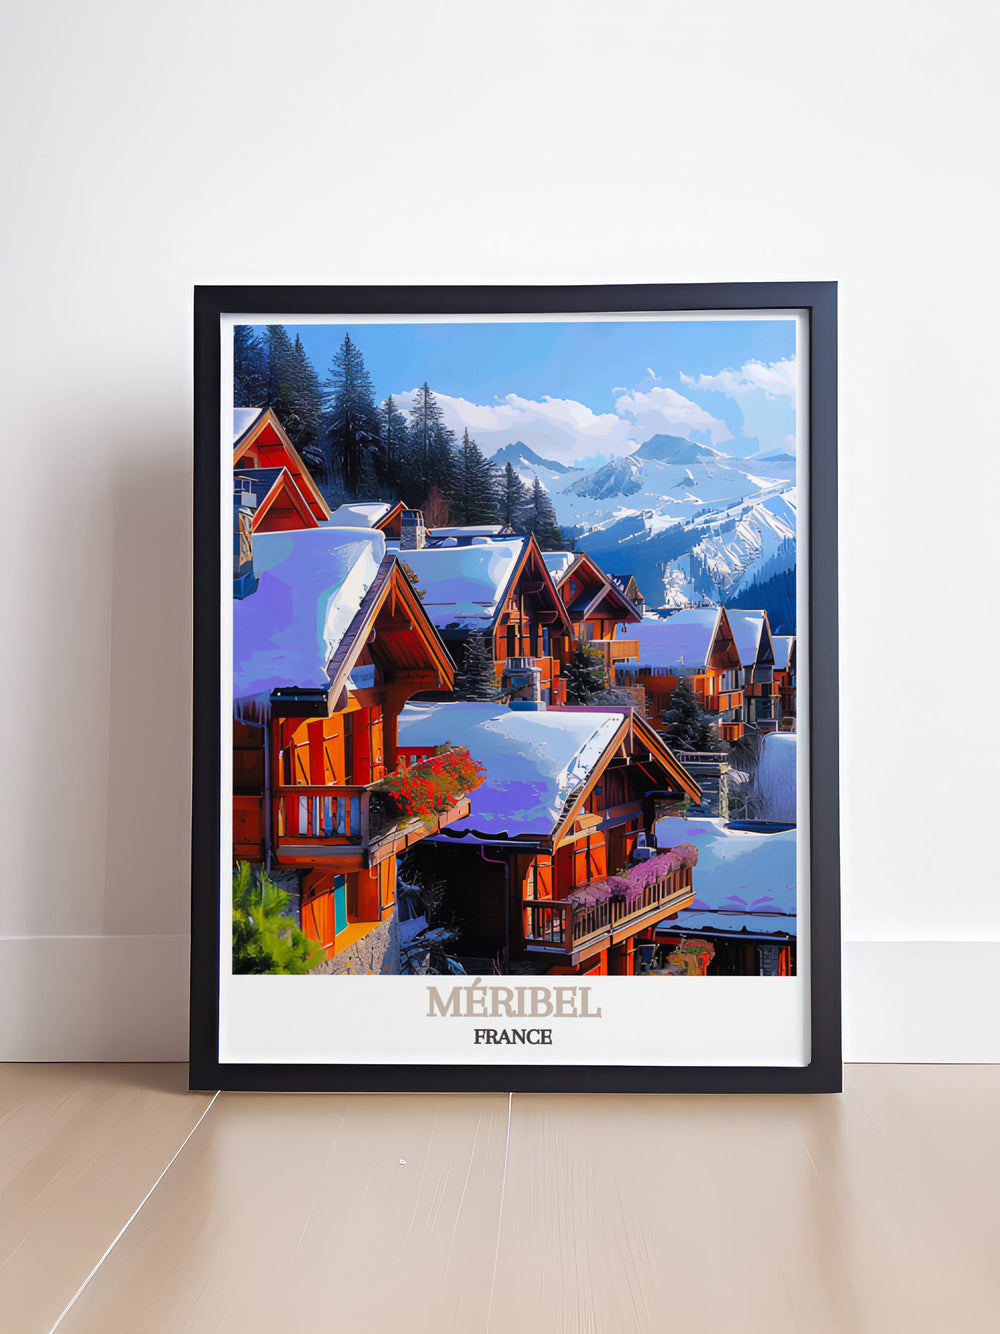 Featuring the picturesque Méribel Village, this poster offers a visual representation of one of the French Alps most charming destinations, ideal for winter sports enthusiasts and adventure seekers.